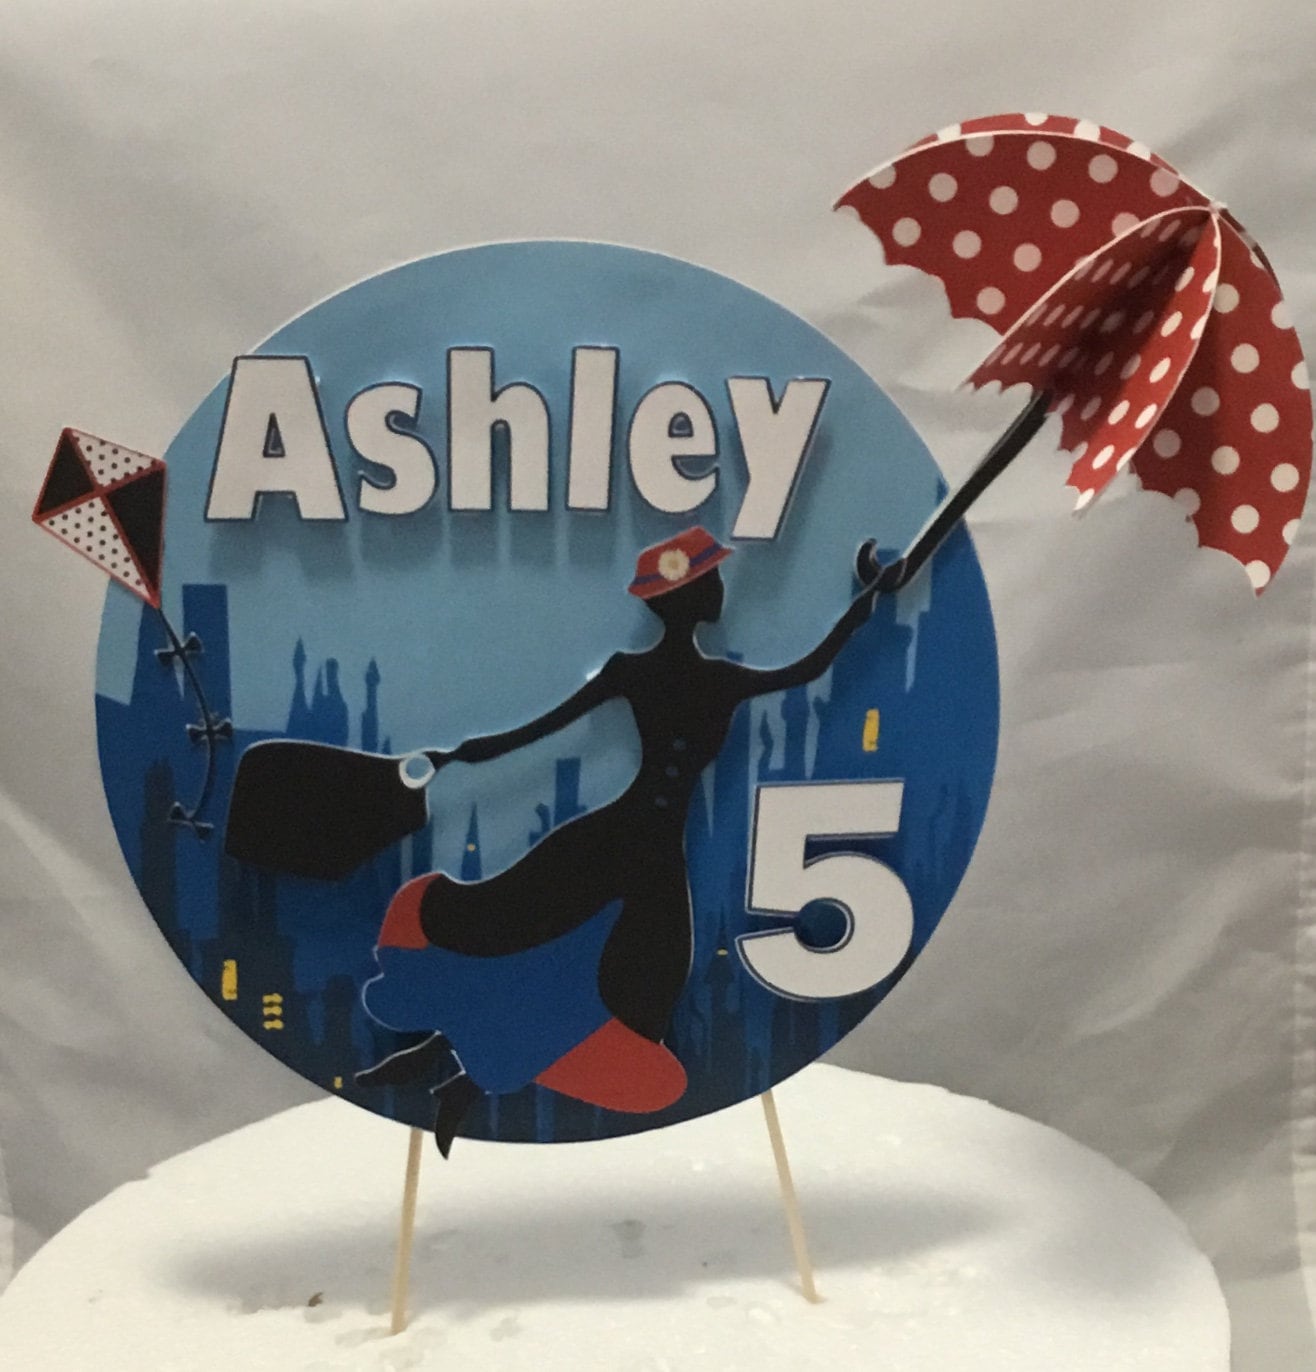 Mary Poppins Inspired Cake Topper/Personalized Cake Topper